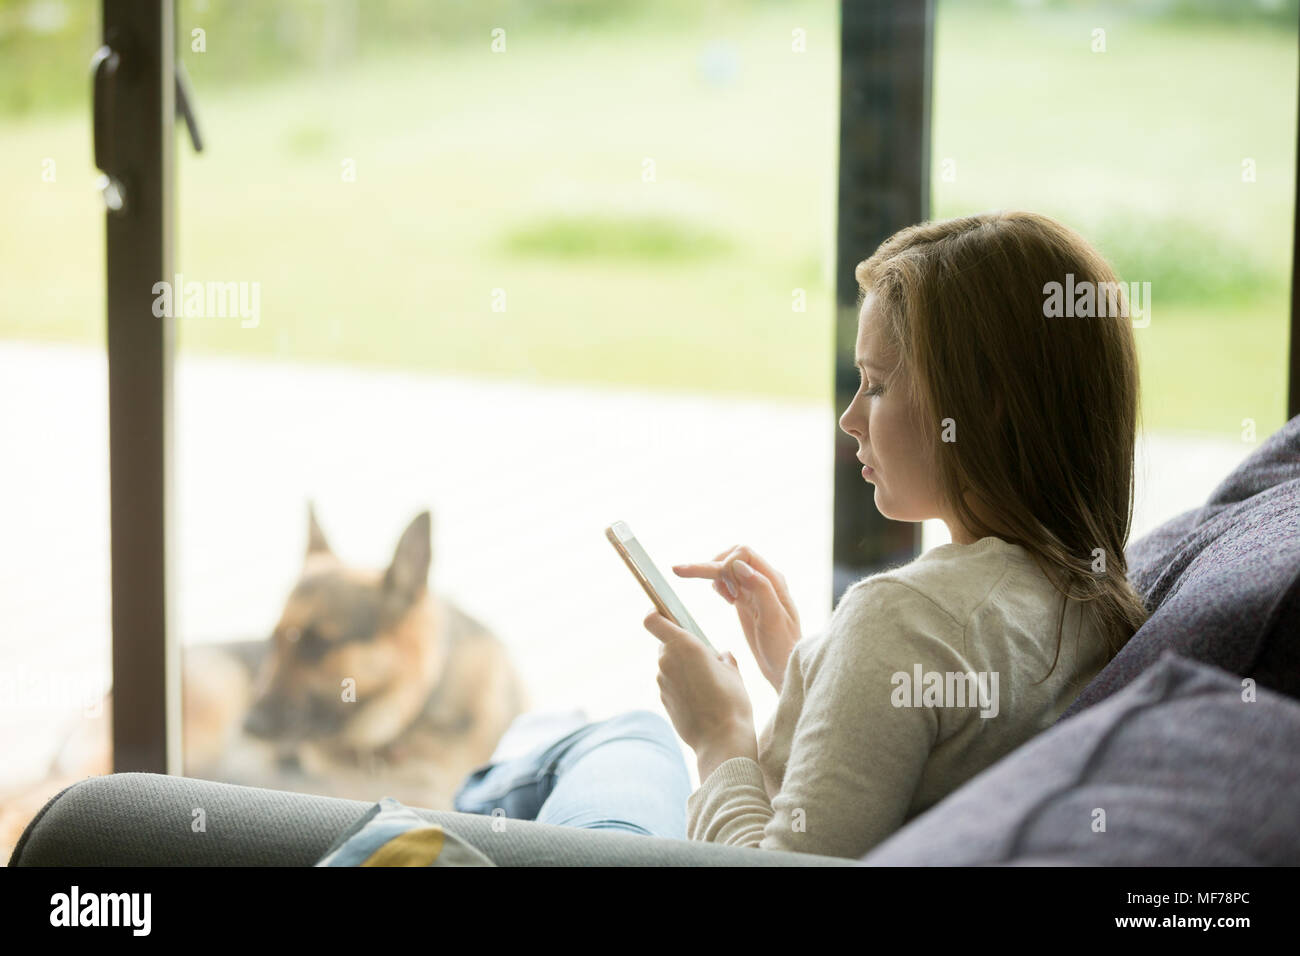 Young woman relaxing on sofa using smartphone apps dans maison Banque D'Images